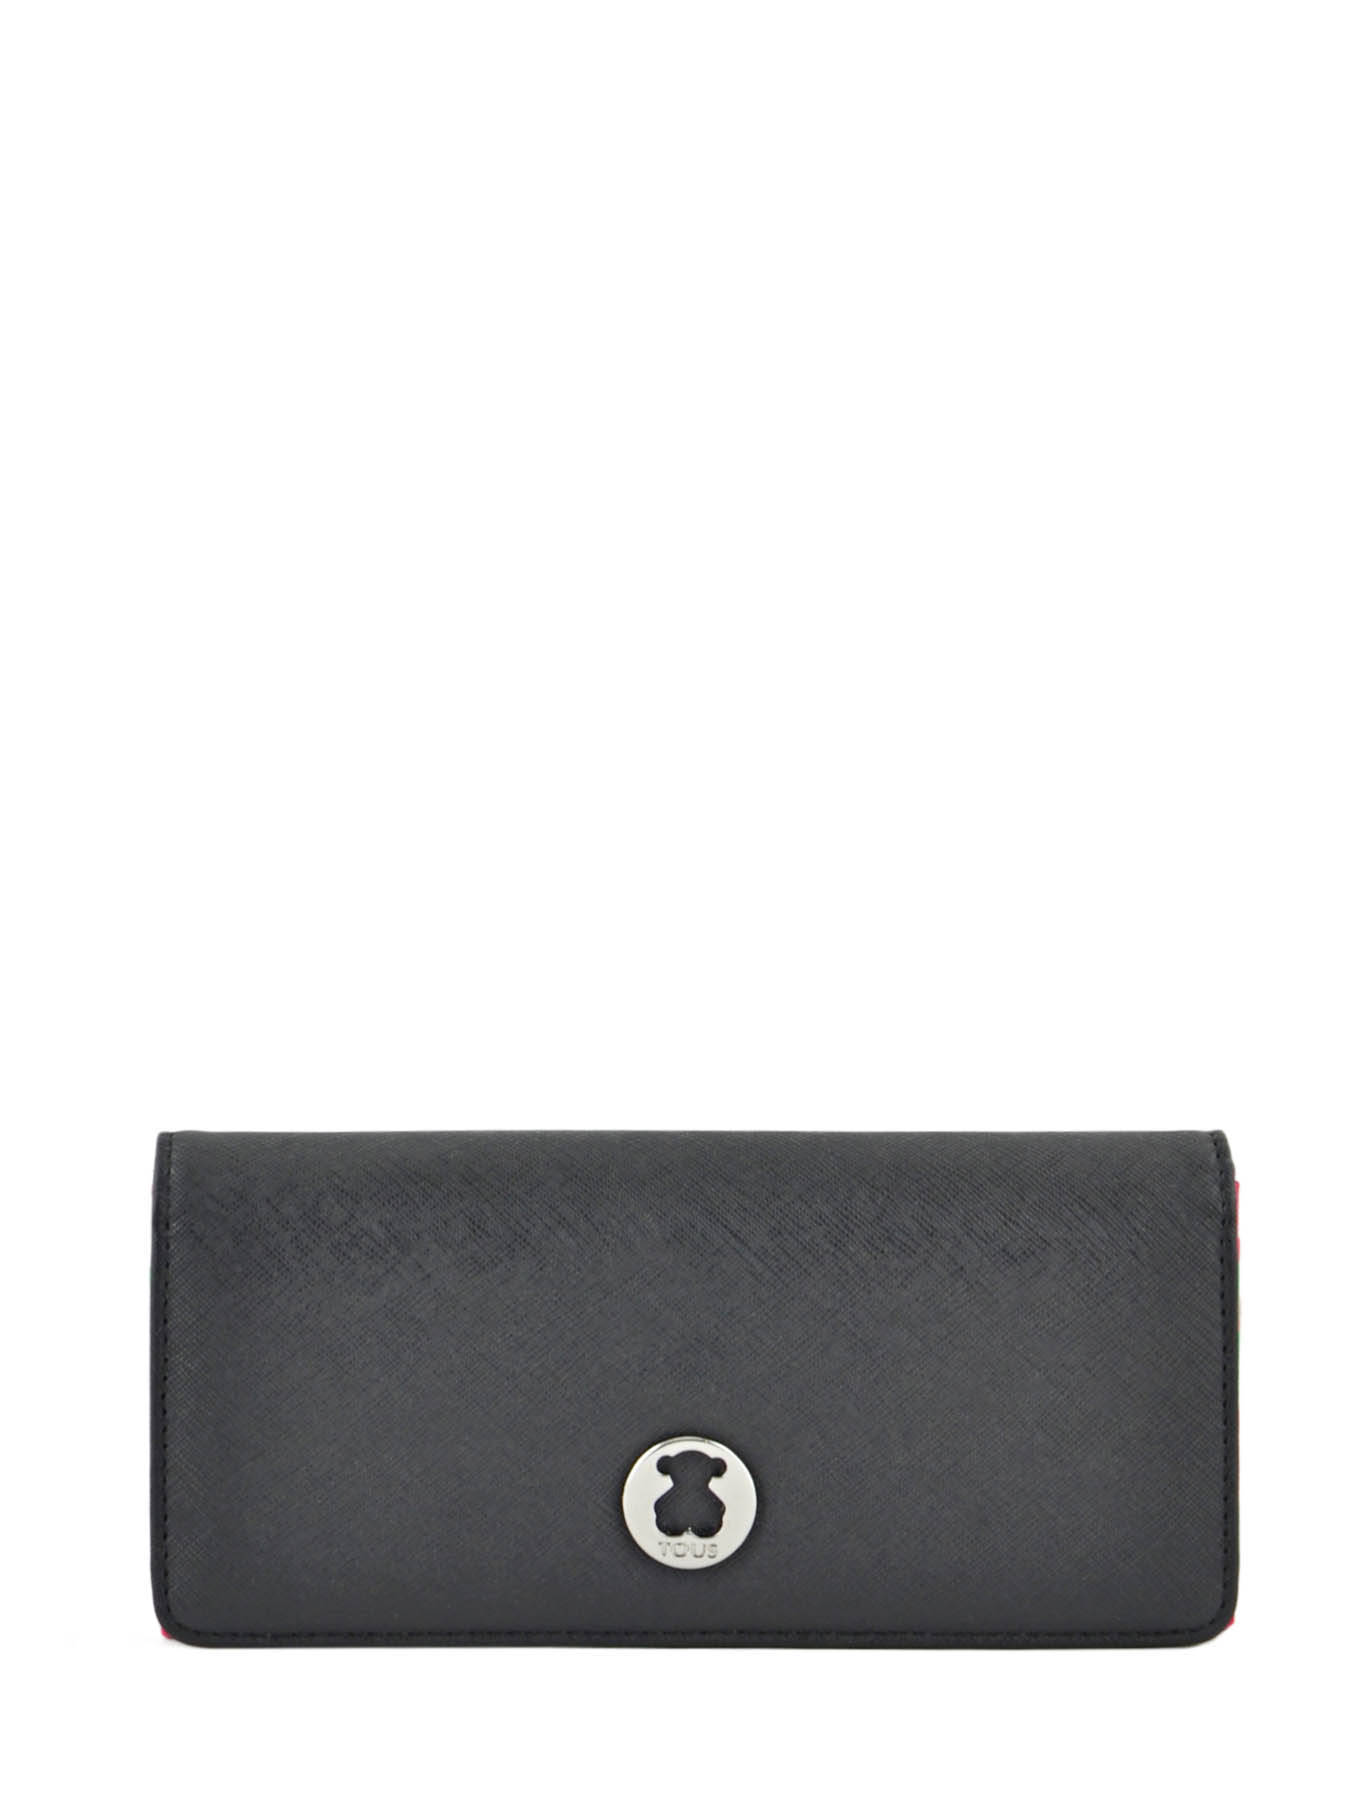 Tous Wallet SHERLYN.DUB - free shipping available